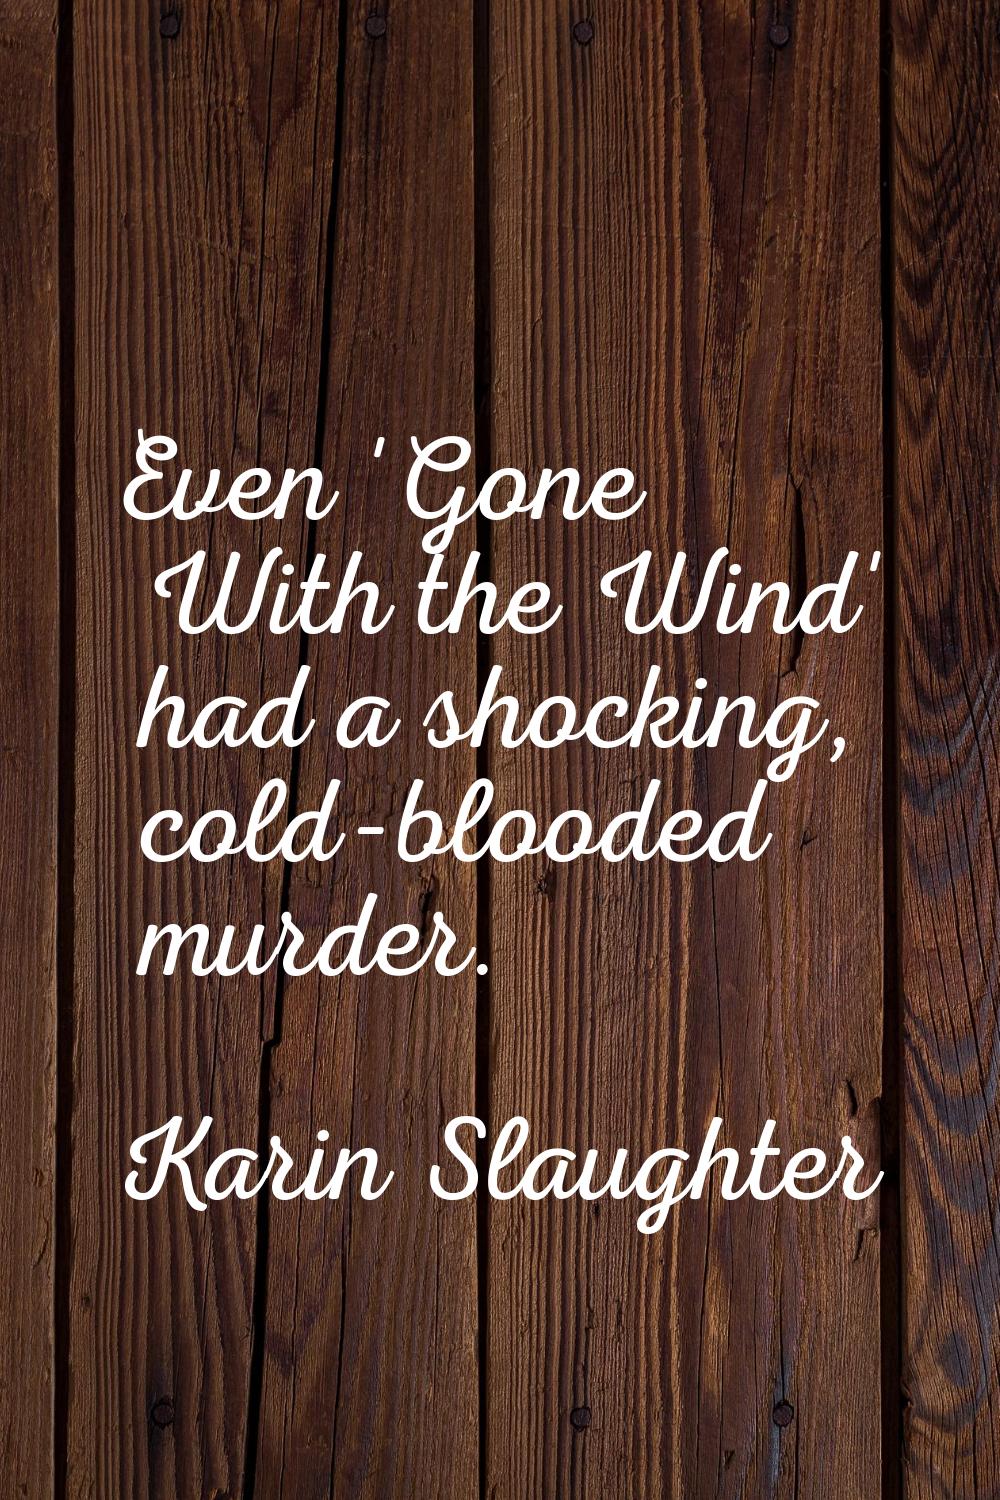 Even 'Gone With the Wind' had a shocking, cold-blooded murder.